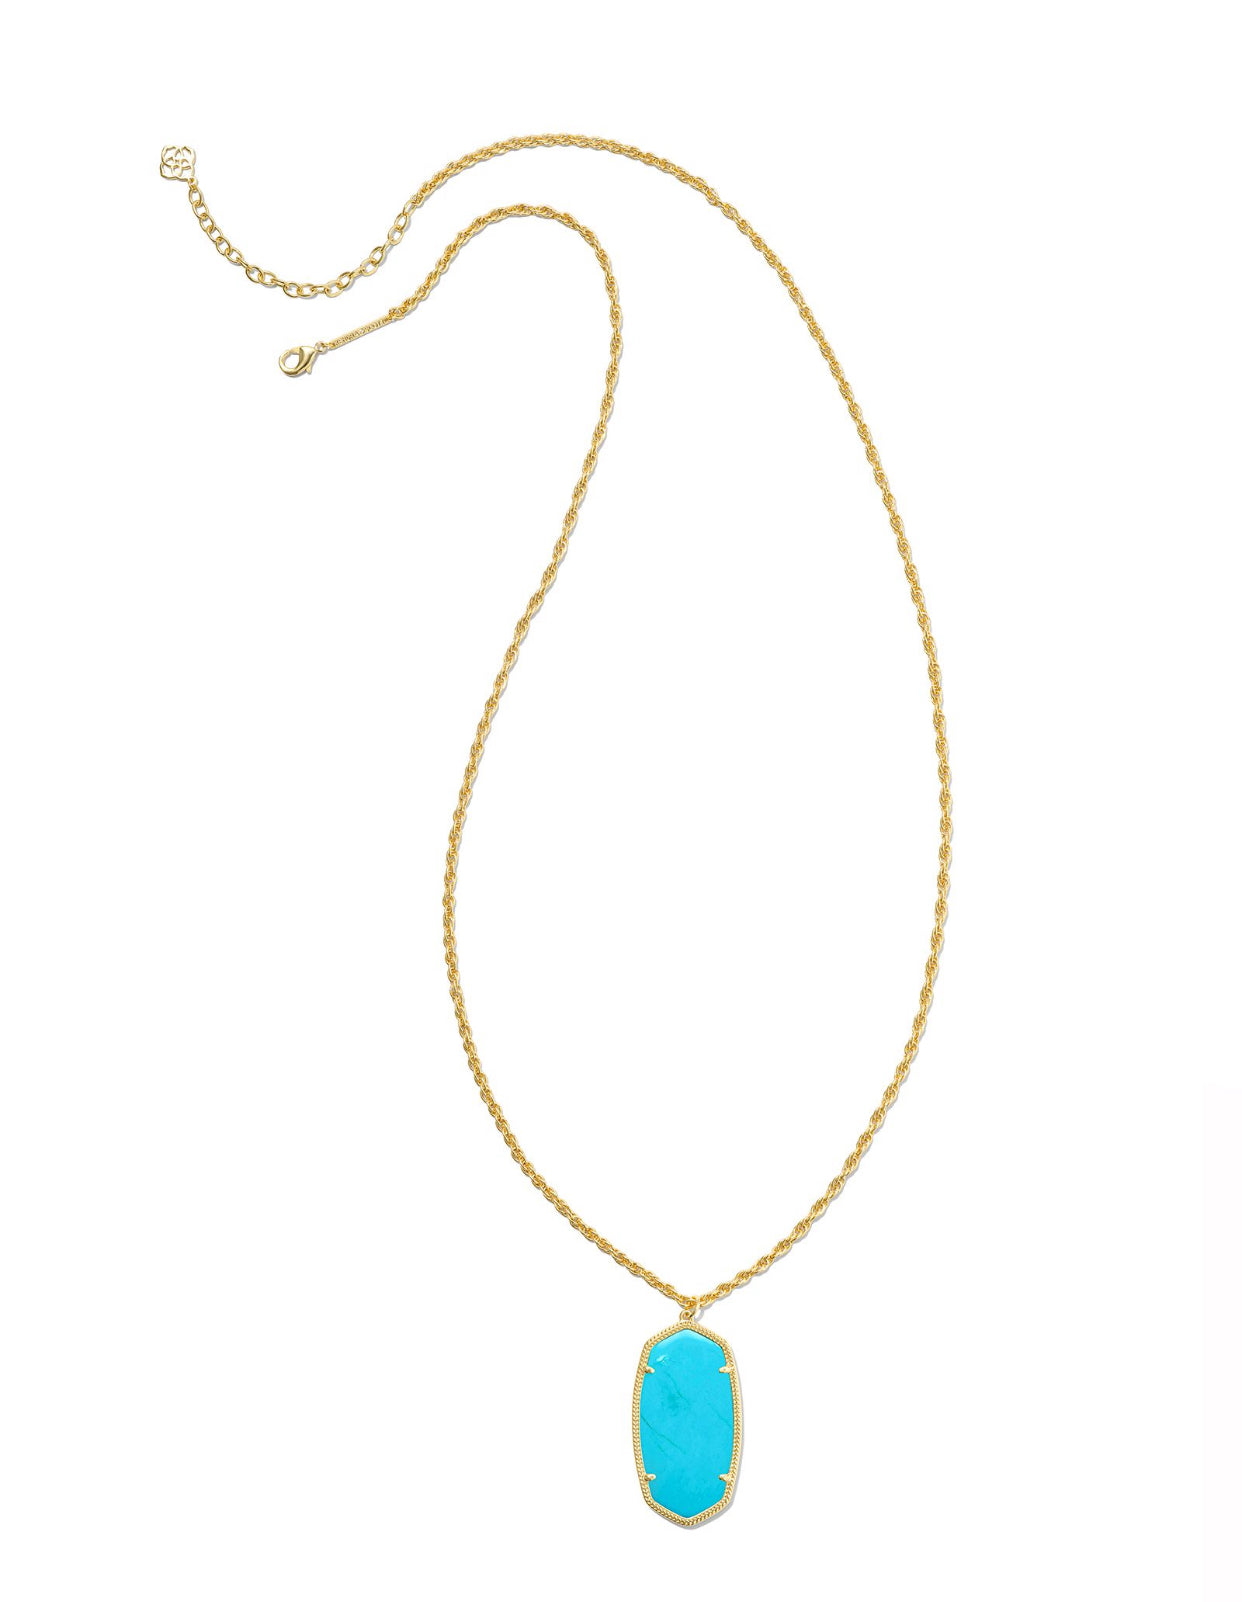 Rae Turquoise Pendant Gold Necklace